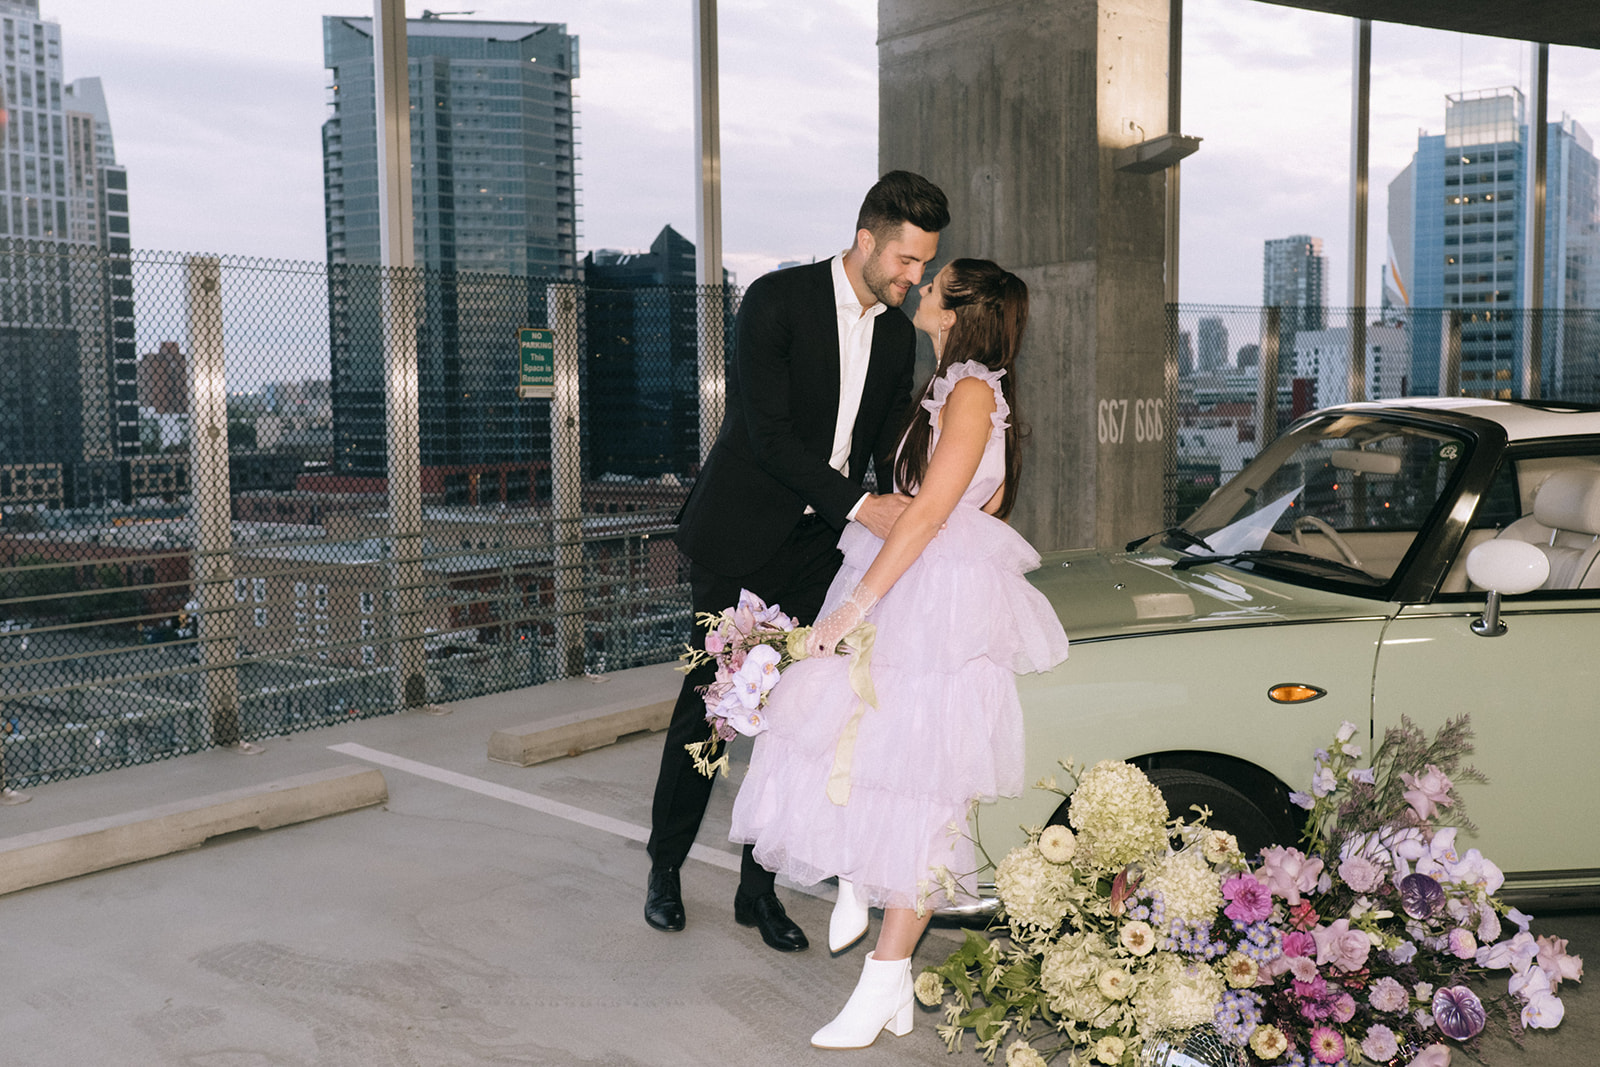 retro wedding with tulle lavender gown, parking lot elopement, downtown wedding, vintage car for wedding, wedding portraits, purple, green and white wedding florals